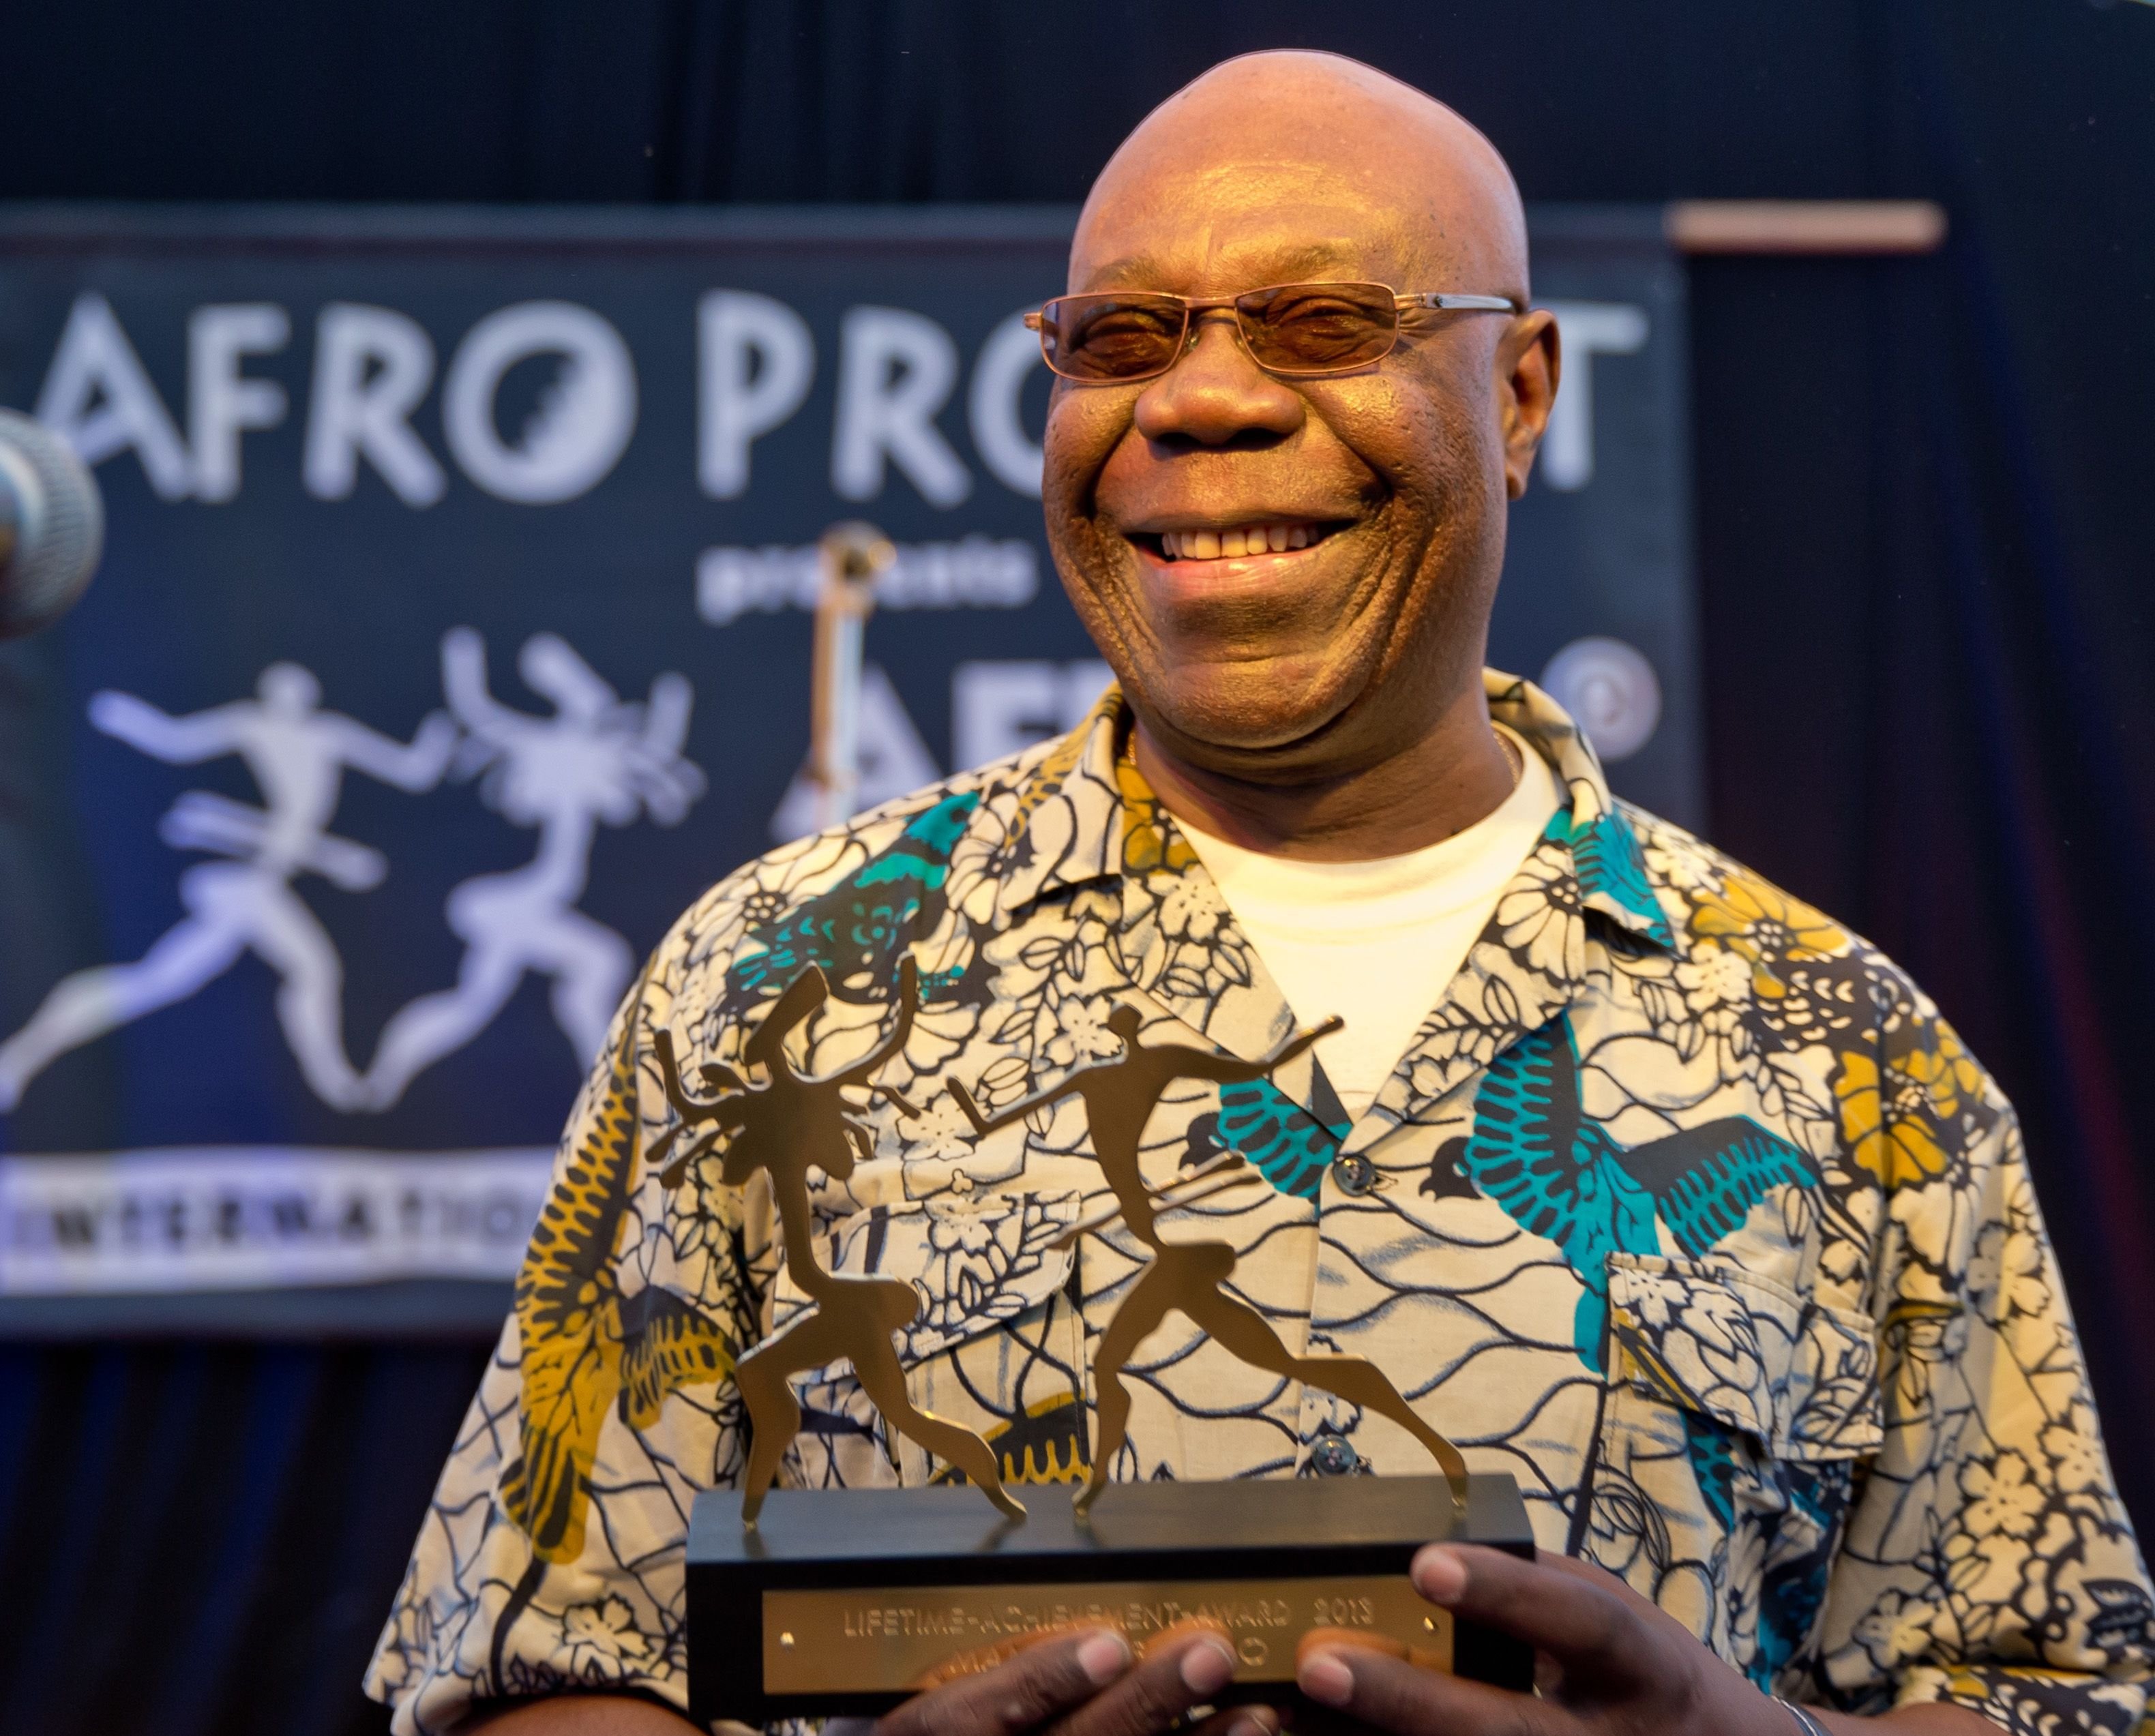 Manu Dibango receiving his Lifetime Achievement Award during the opening of the 25th Africa festival in Germany in June 2013. | Photo: Getty Images